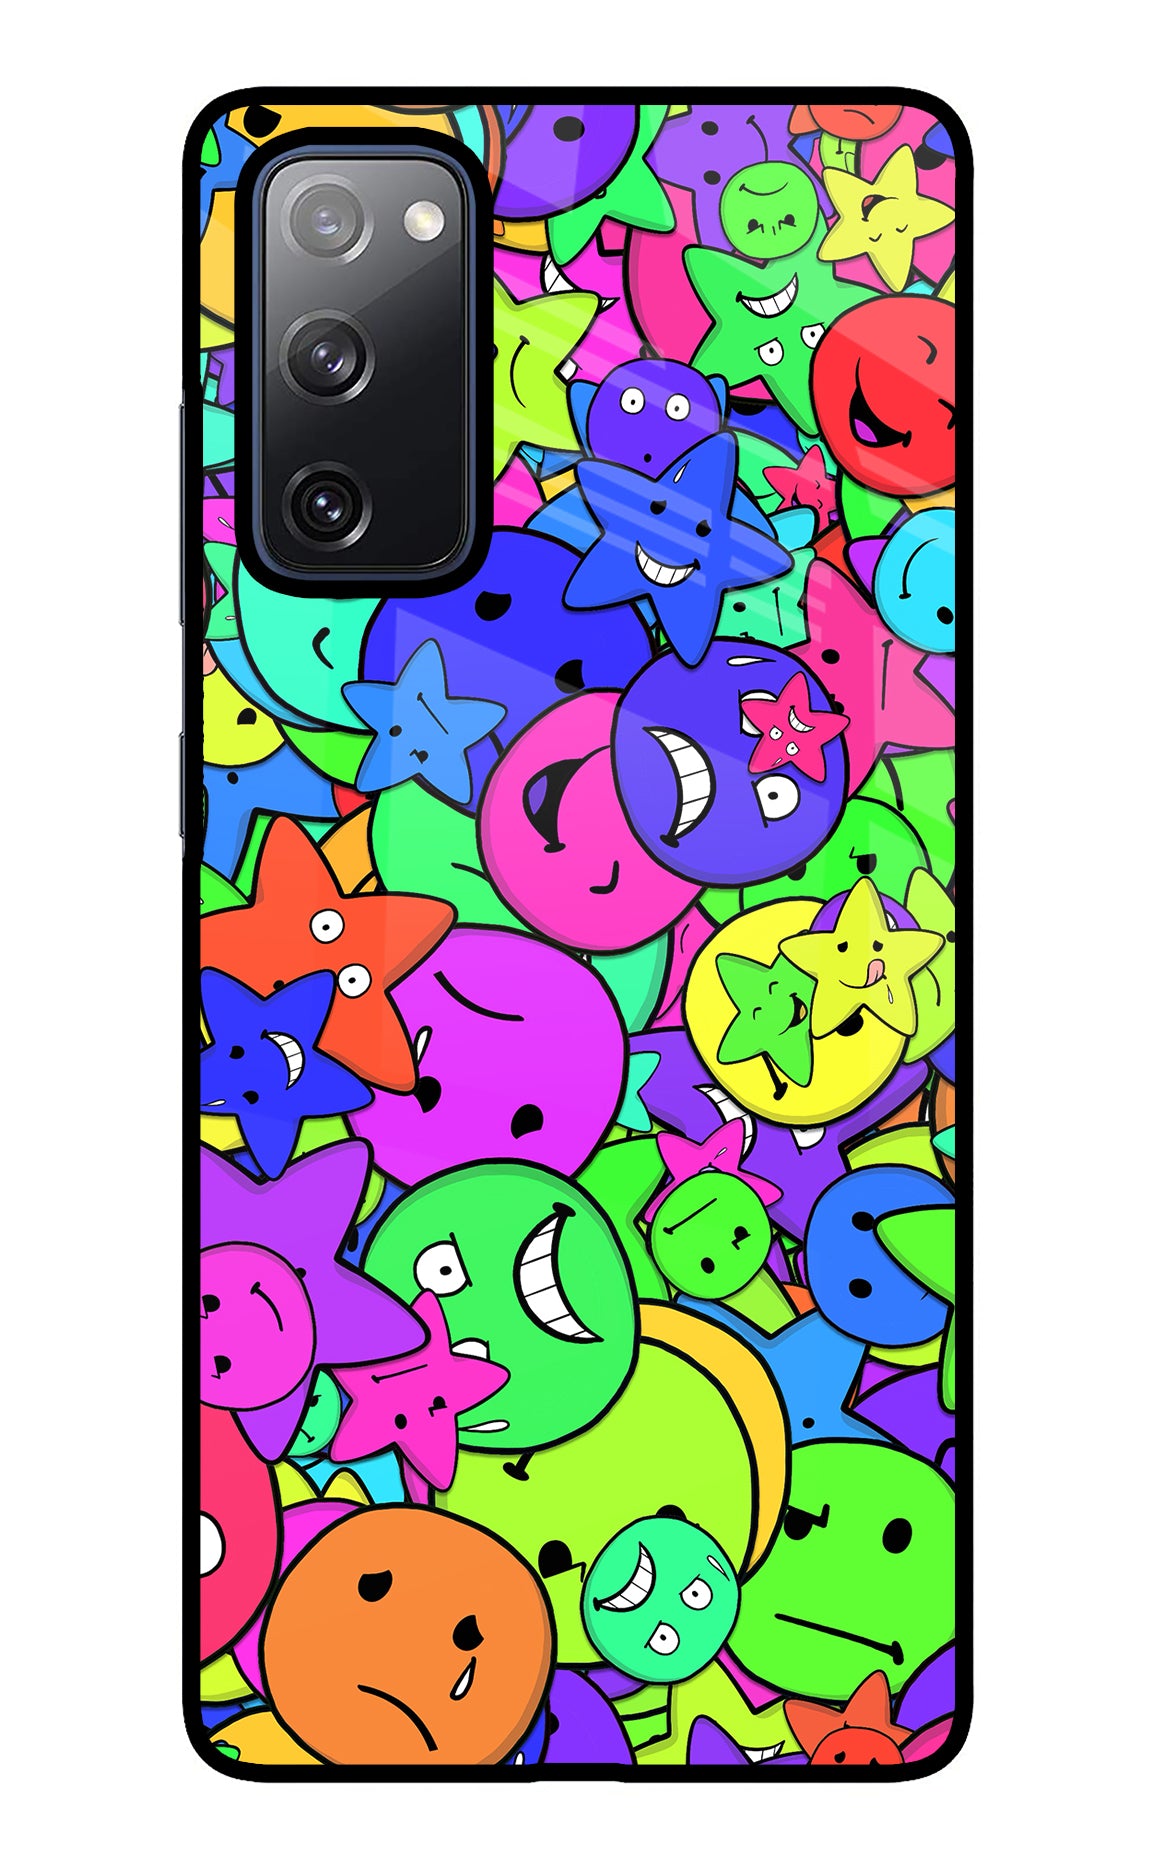 Fun Doodle Samsung S20 FE Back Cover